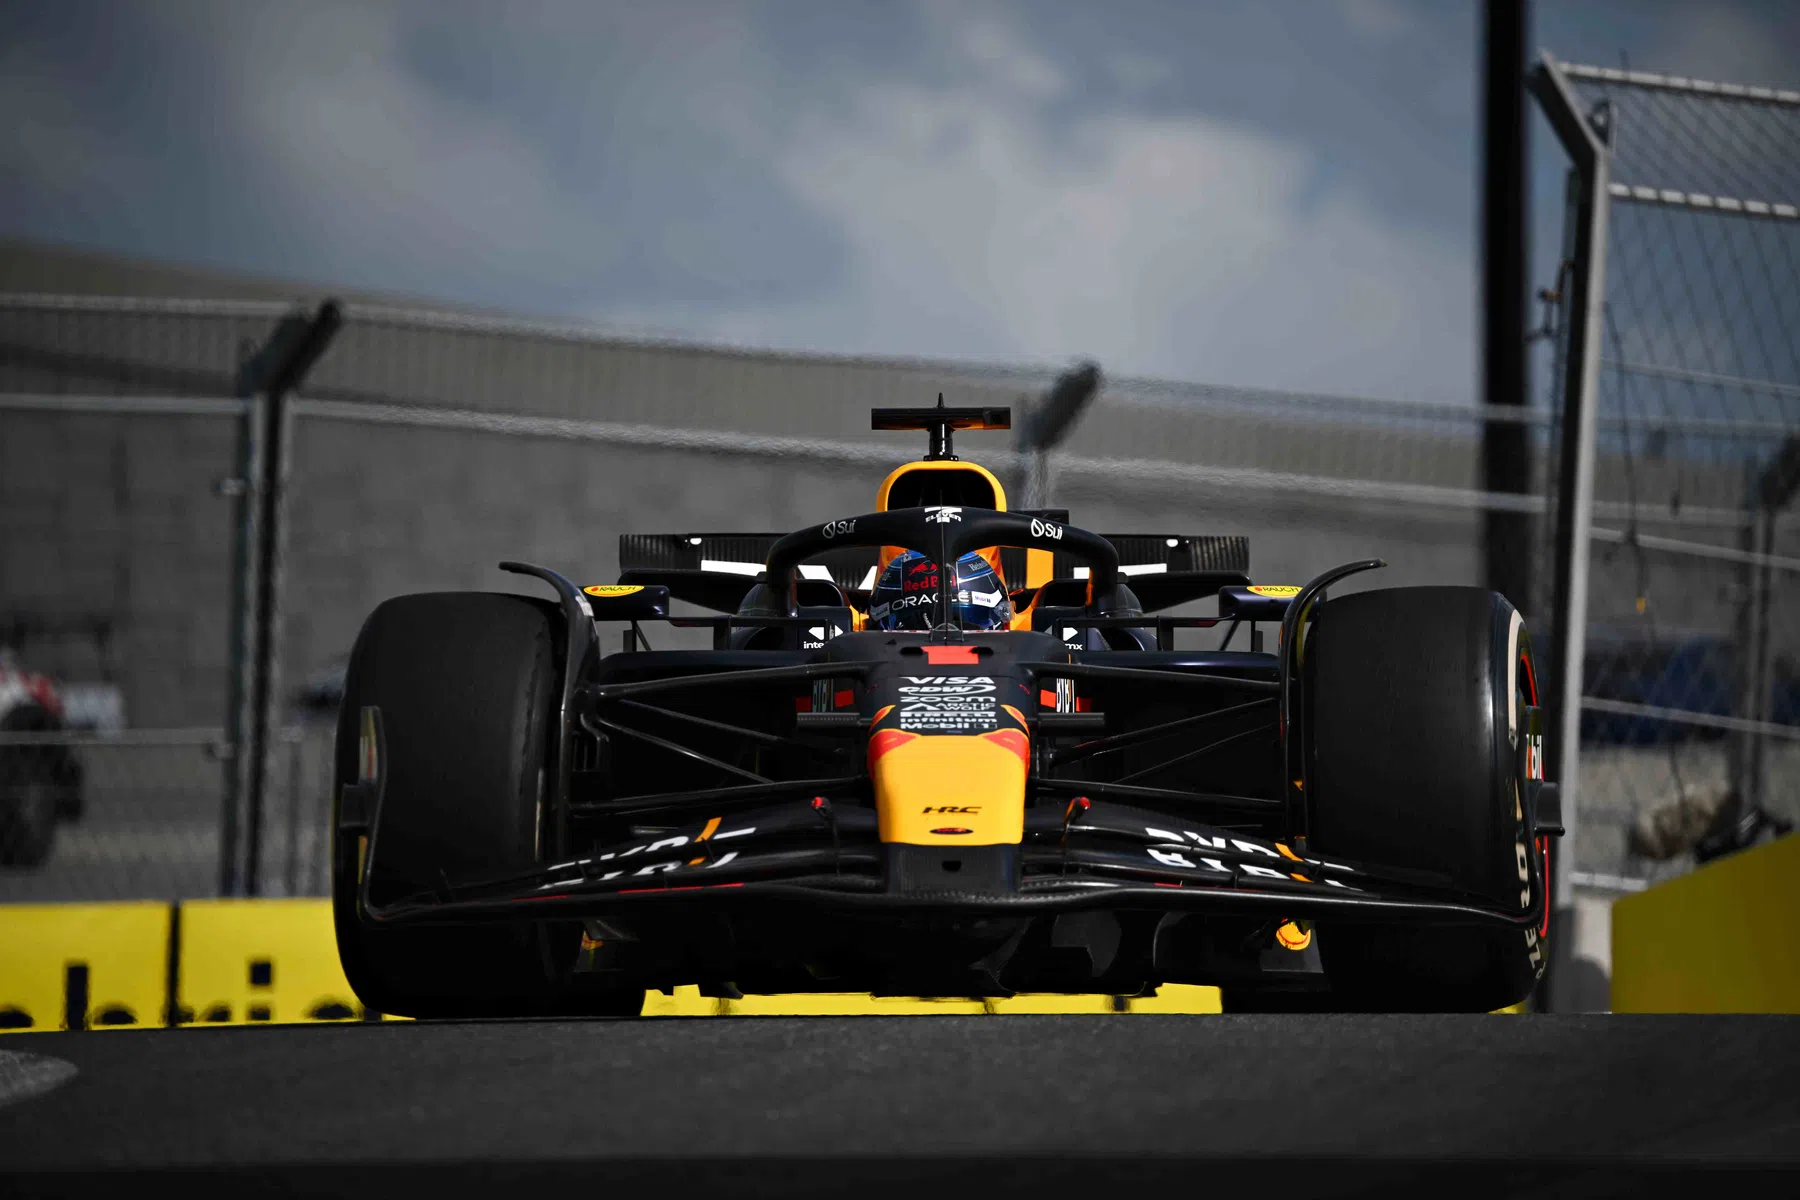 analyse peter windsor na gp miami over max verstappen